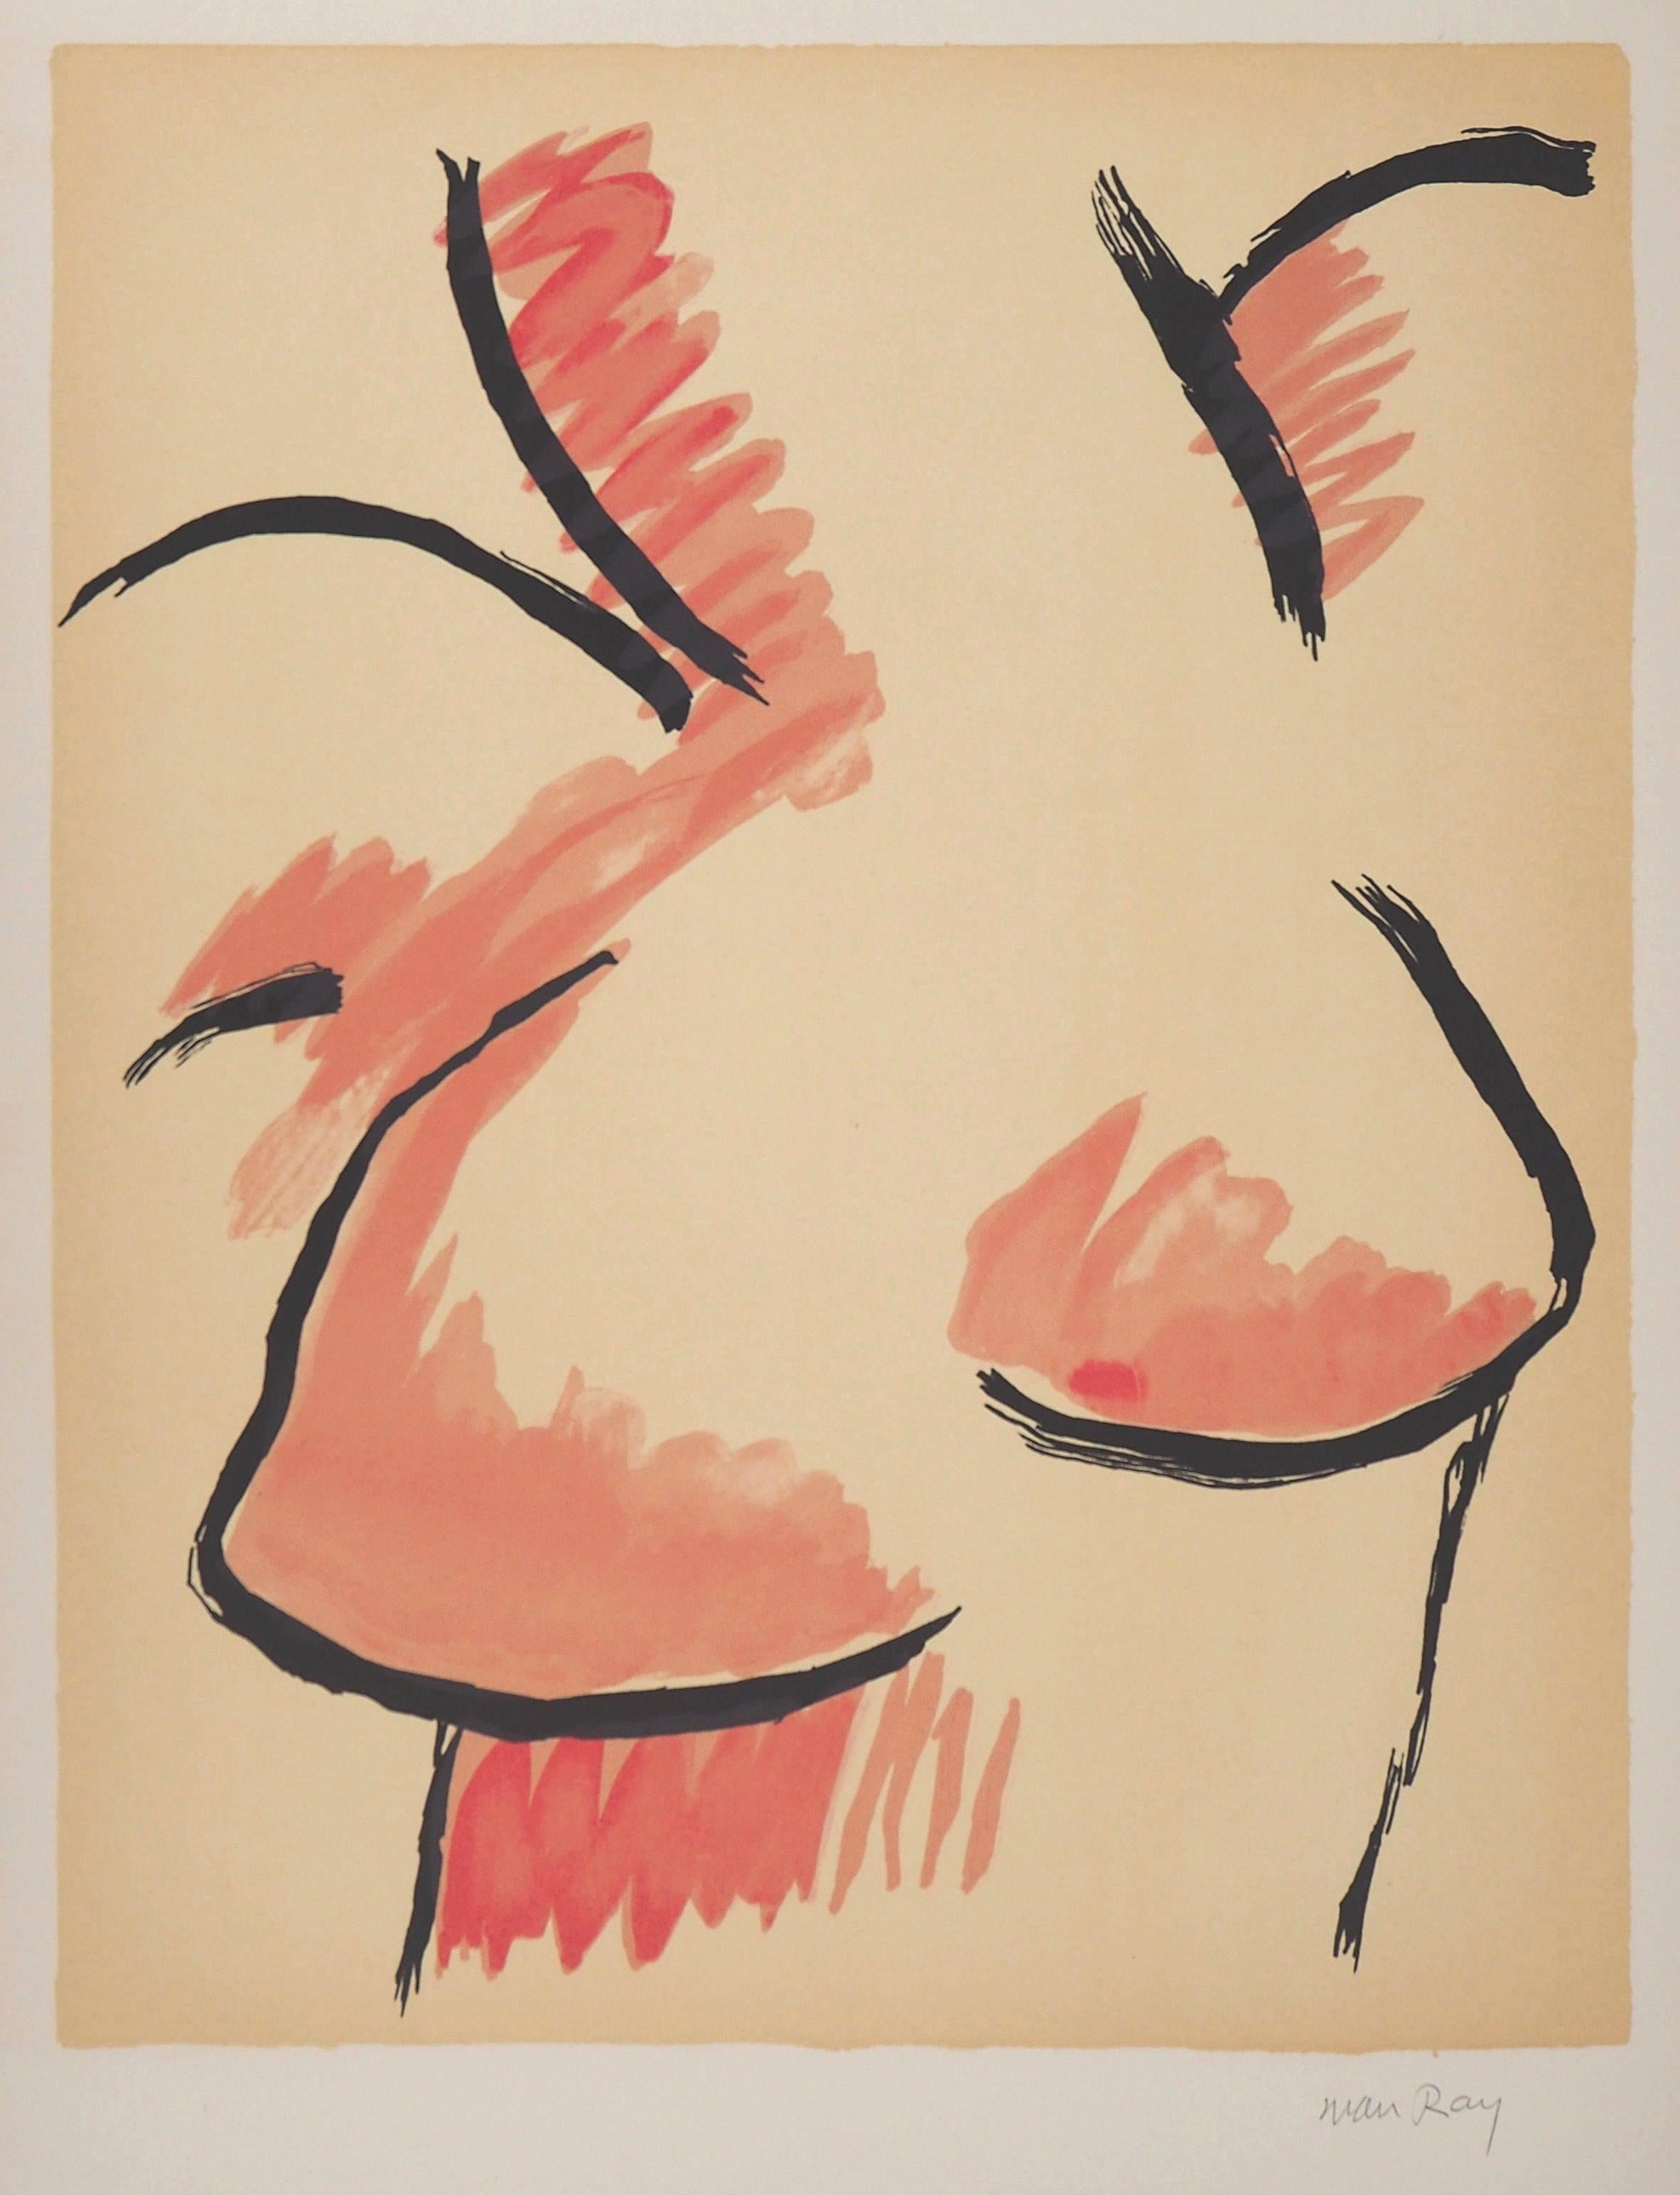 Man Ray Figurative Print - Female Bust - Handsigned Original Lithograph